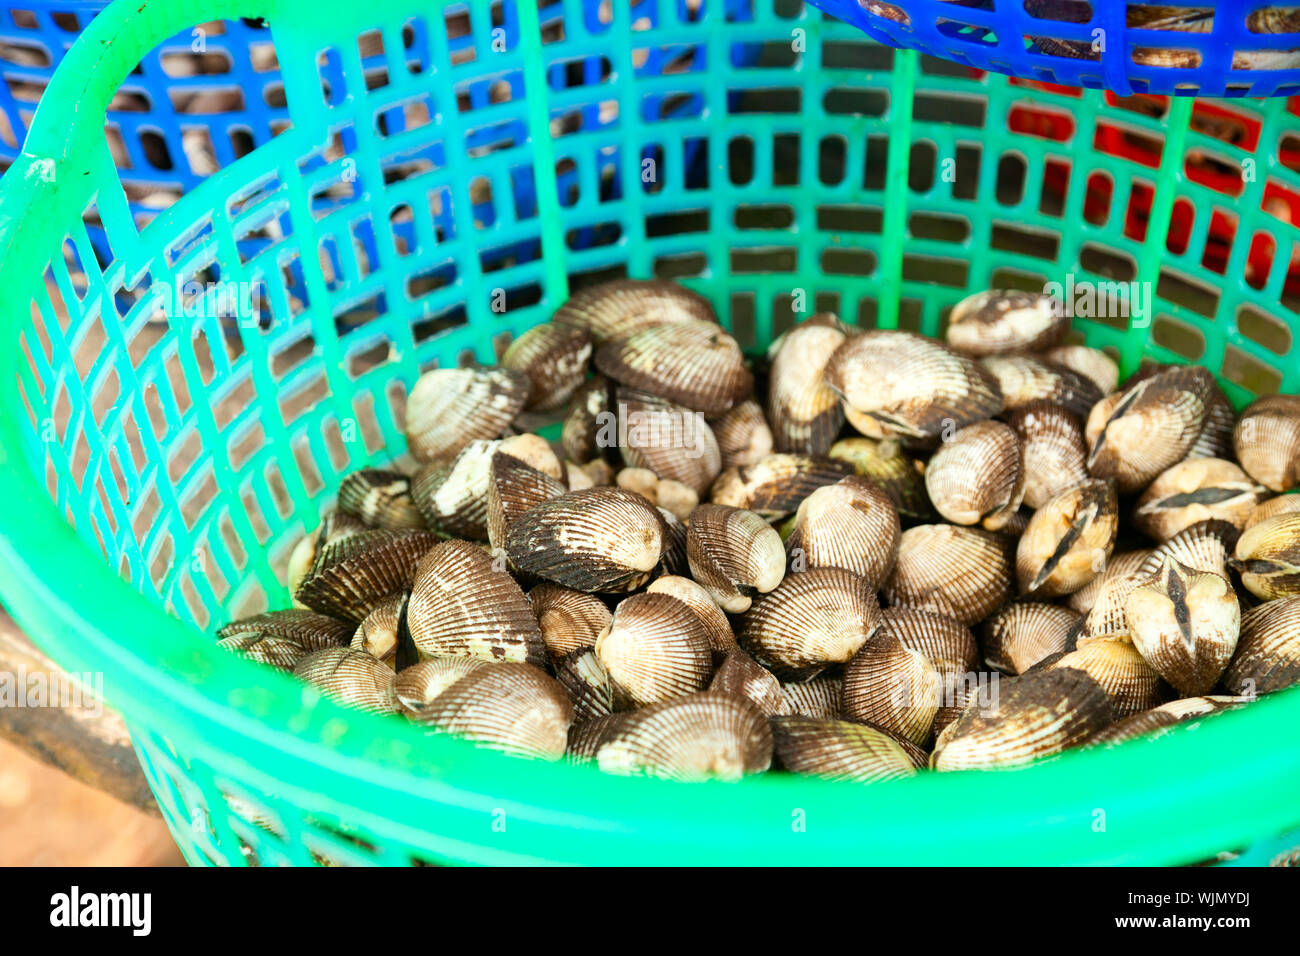 Freshly harvested clams at a market in Vietnam Stock Photo